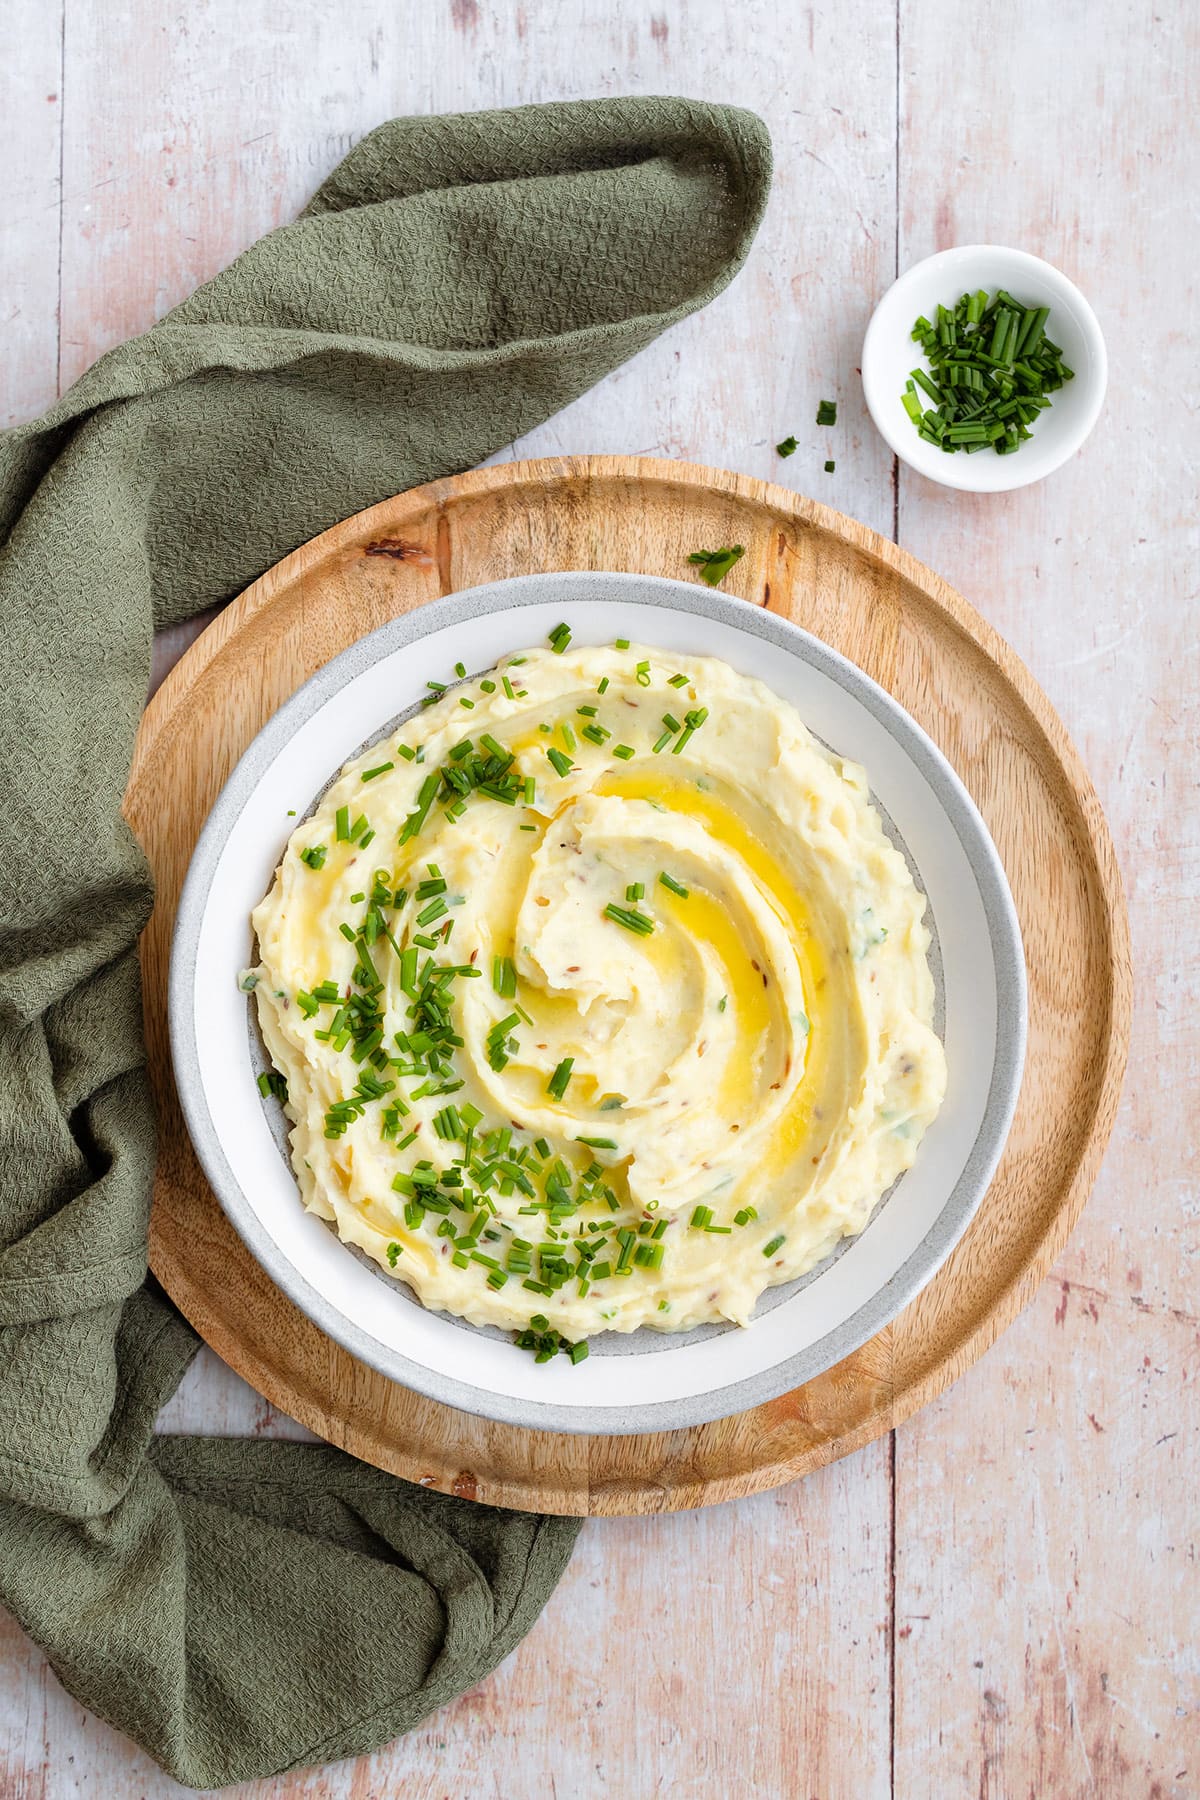 Mashed potatoes topped with fresh chives and butter in a grey shallow bowl.